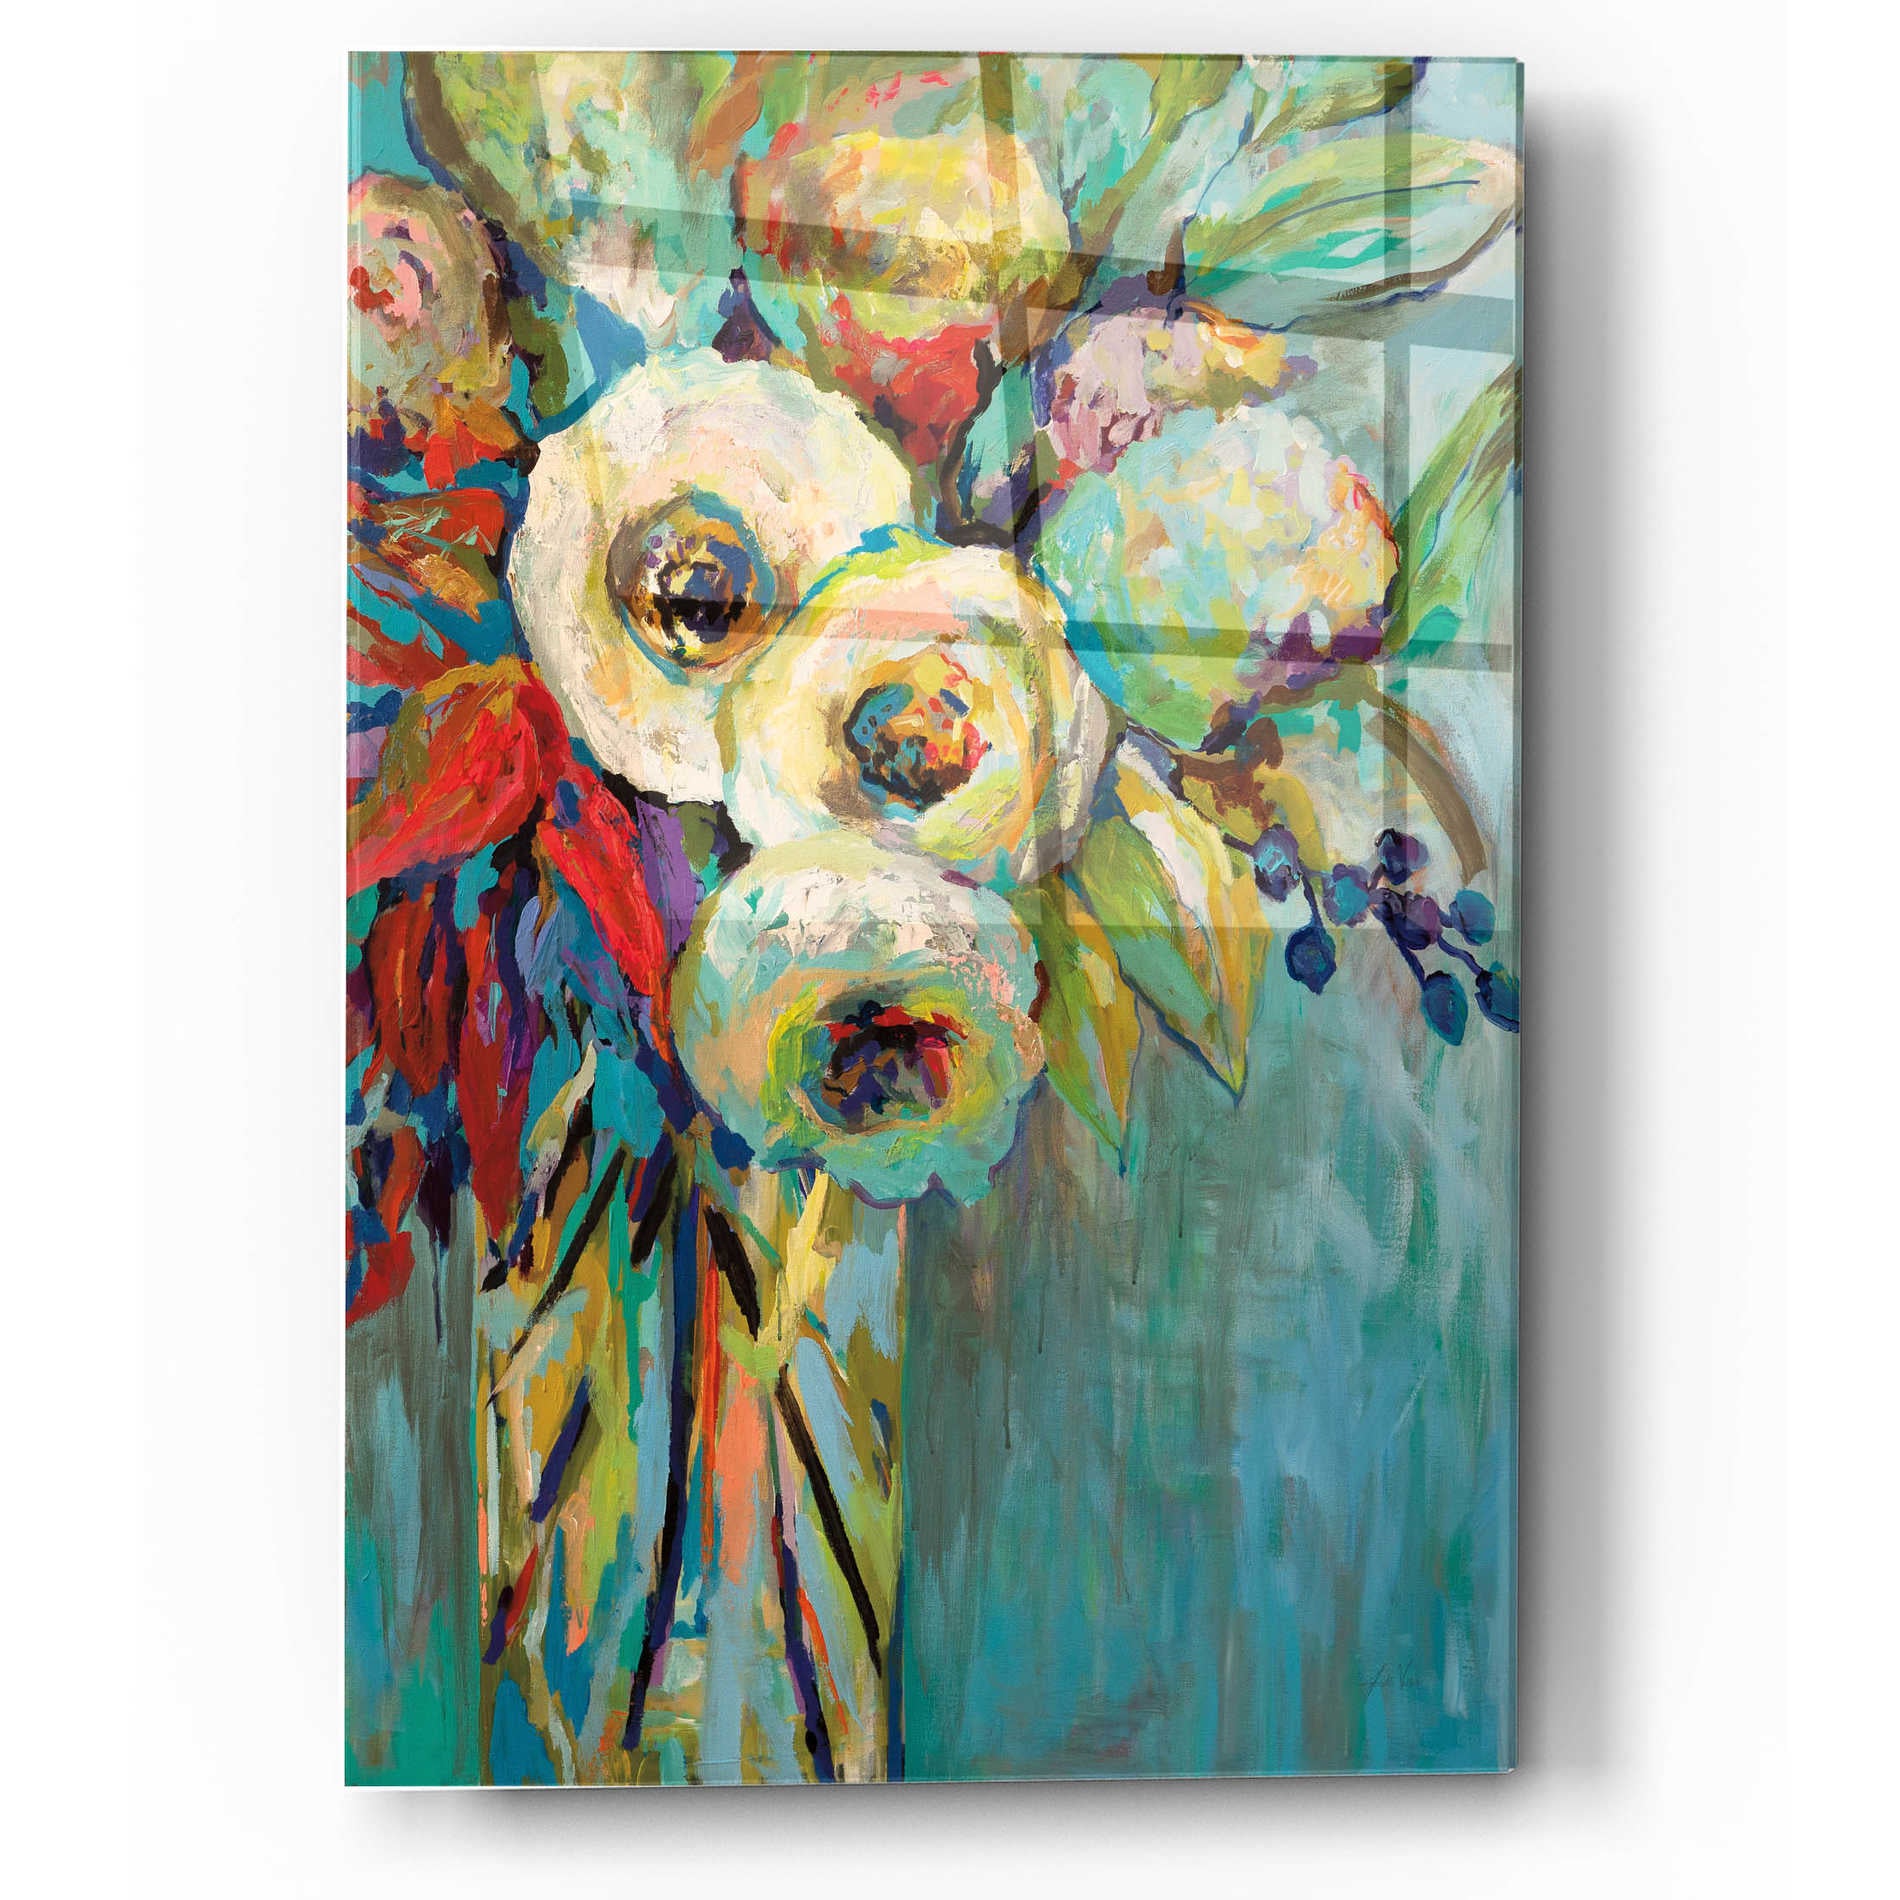 Epic Art 'Mod Floral' by Jeanette Vertentes, Acrylic Glass Wall Art,12x16